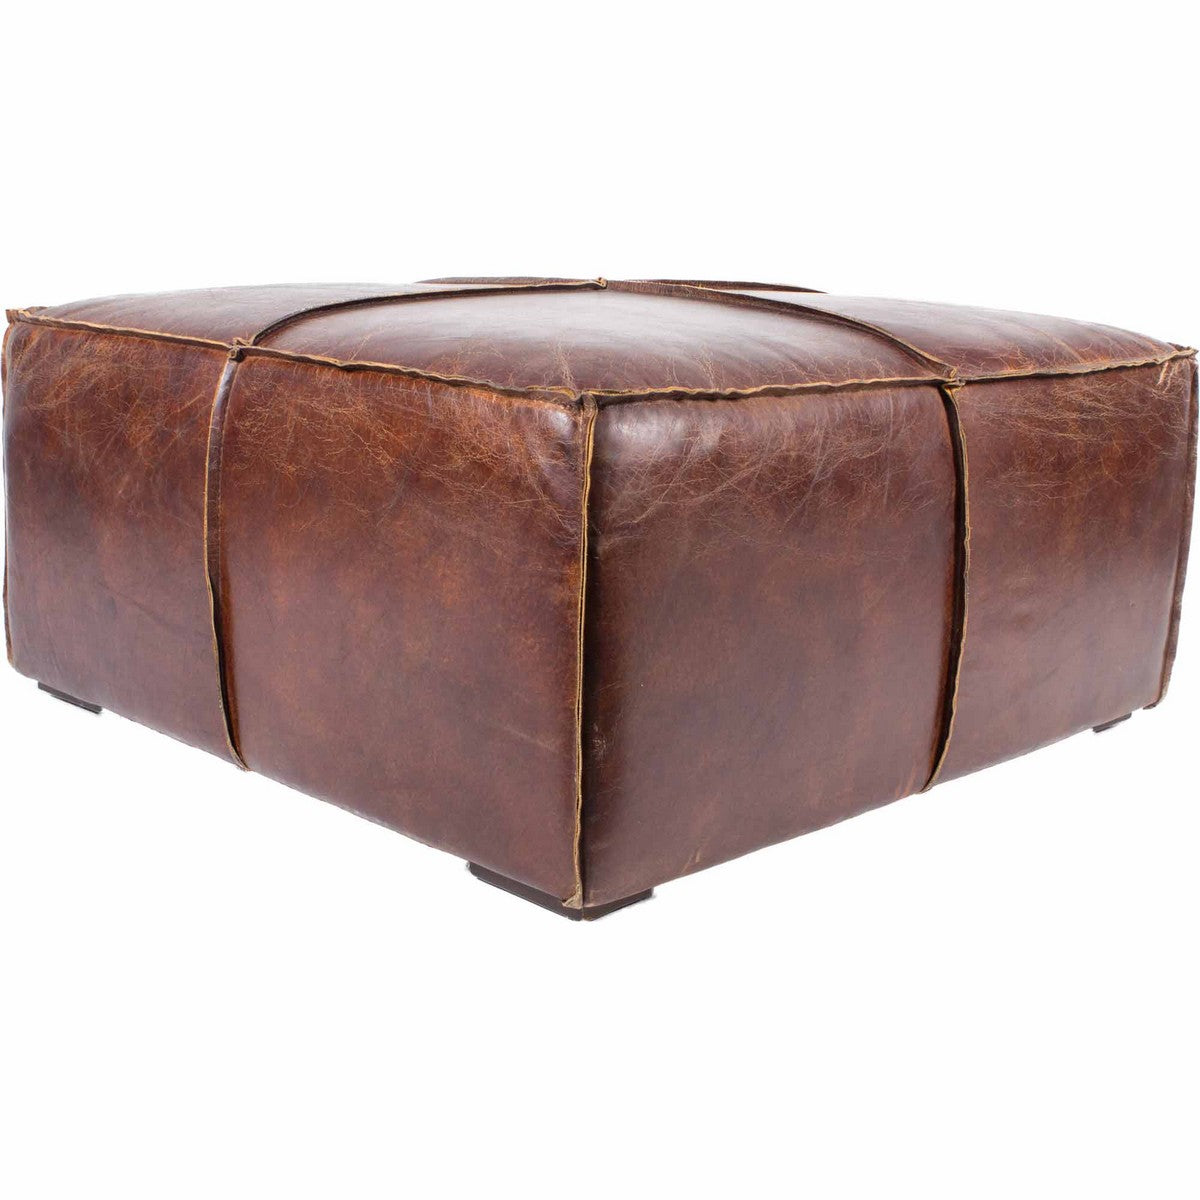 Moe's Home Collection Stamford Coffee Table Brown - PK-1019-20